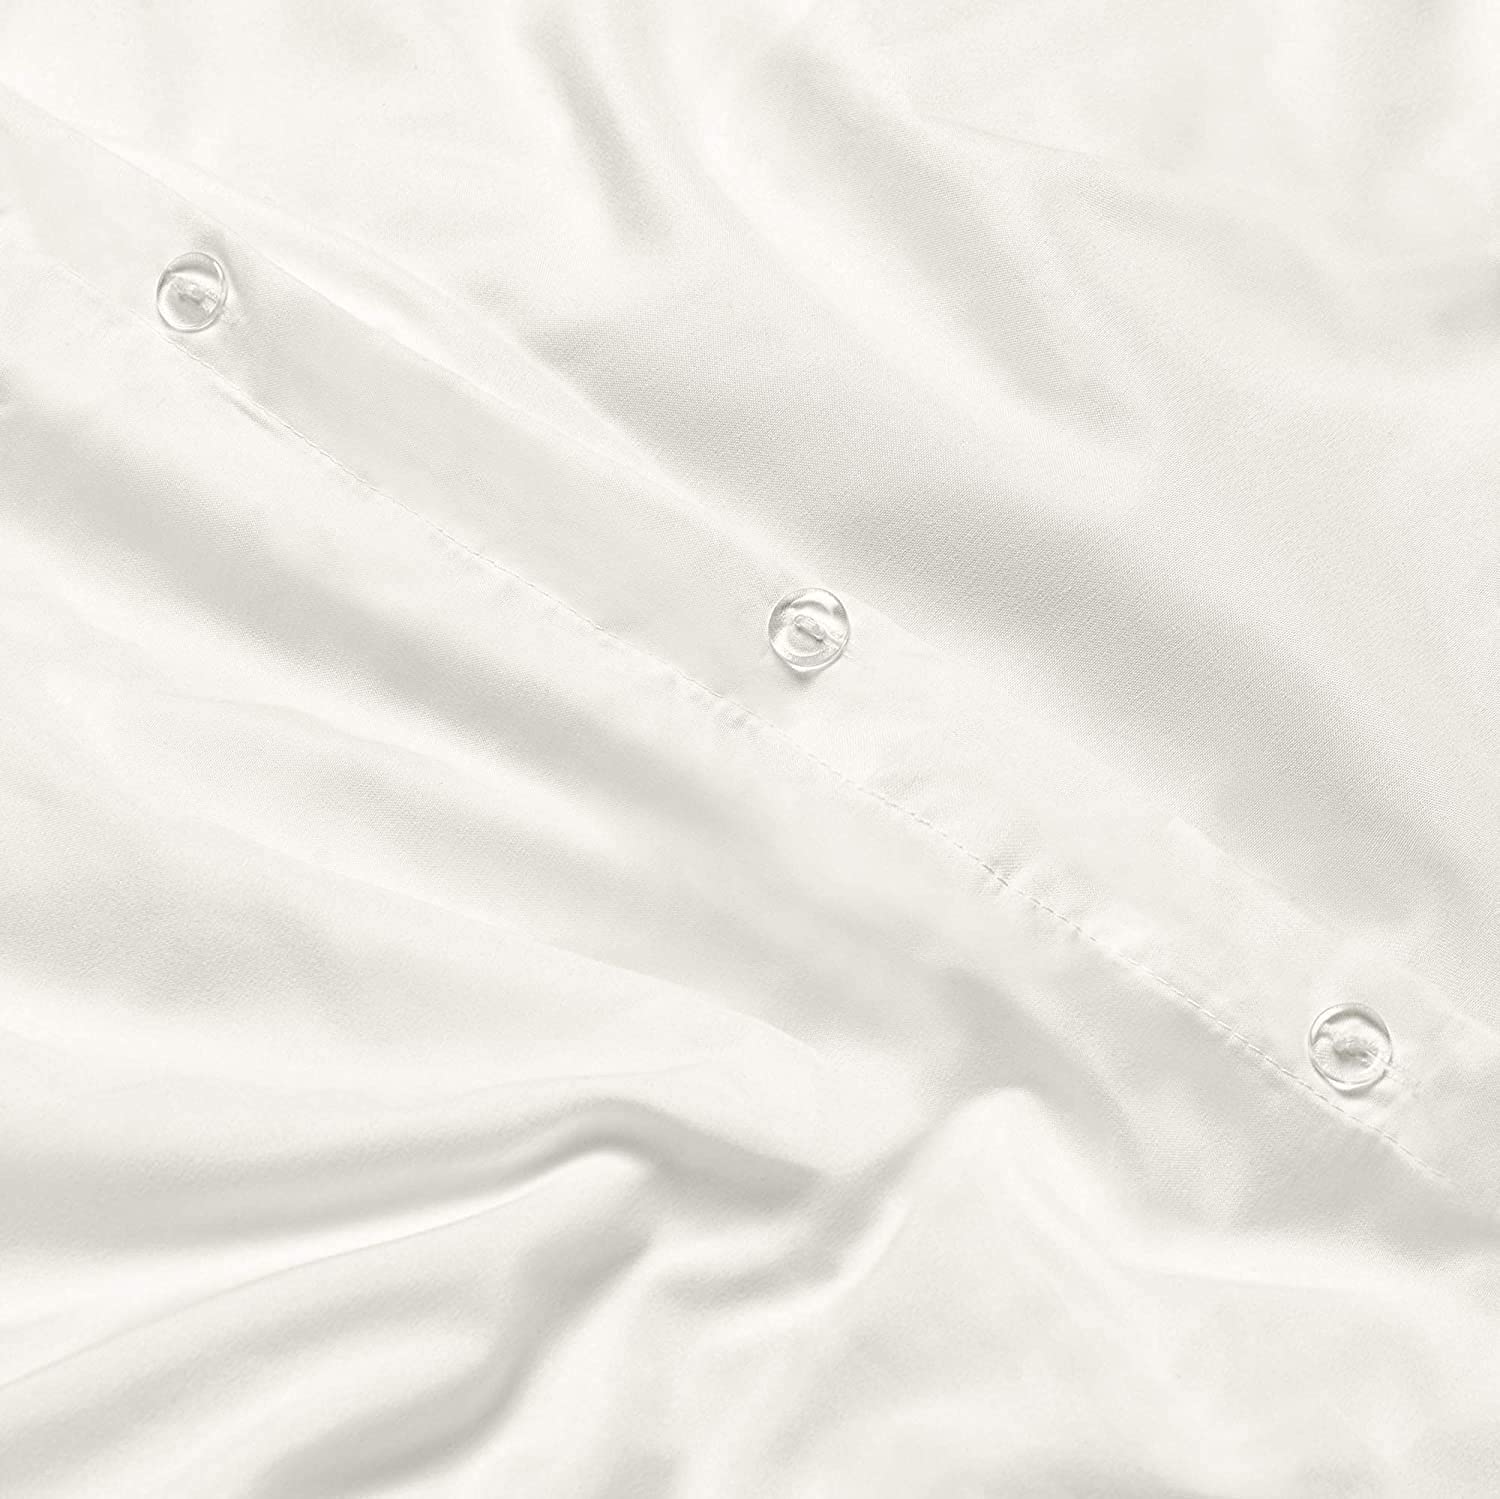 AURORA PLUS 100% Pure Egyptian Cotton Queen White Duvet Cover – 400 Thread Count- 3 Piece- Sateen Weave- Long Staple Combed Cotton-Extra Soft Smooth Silky- Sateen Weave (Queen,White)